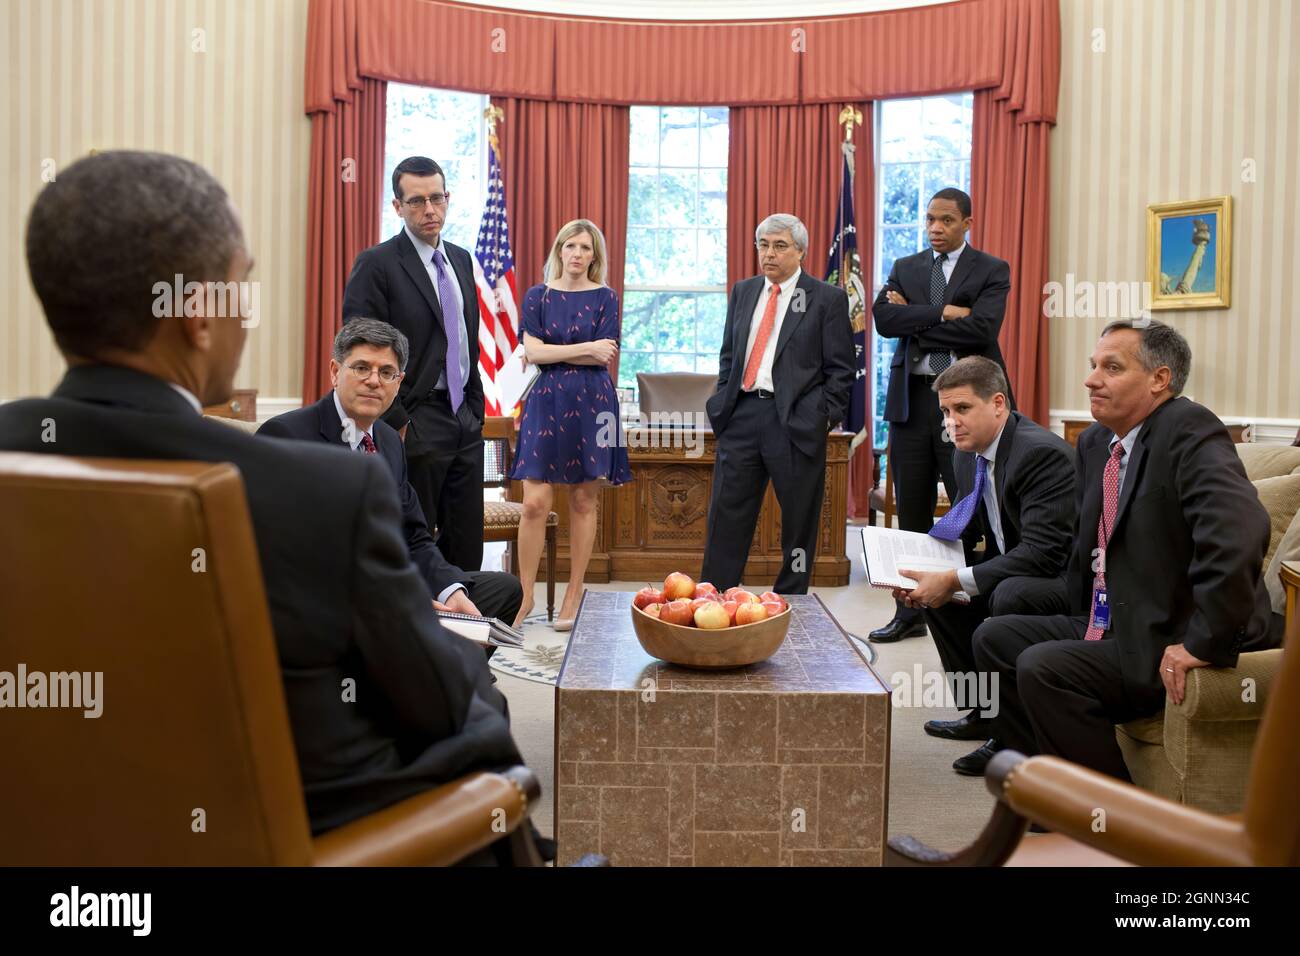 President Barack Obama meets with senior advisors in the Oval Office, June 15, 2012. Pictured, from left, are: Chief of Staff Jack Lew; Senior Advisor David Plouffe; Counsel to the President Kathryn Ruemmler; Counselor to the President Pete Rouse; Rob Nabors, Assistant to the President for Legislative Affairs; Director of Communications Dan Pfeiffer; and Mark Childress, Deputy Chief of Staff for Planning. (Official White House Photo by Pete Souza) This official White House photograph is being made available only for publication by news organizations and/or for personal use printing by the subj Stock Photo